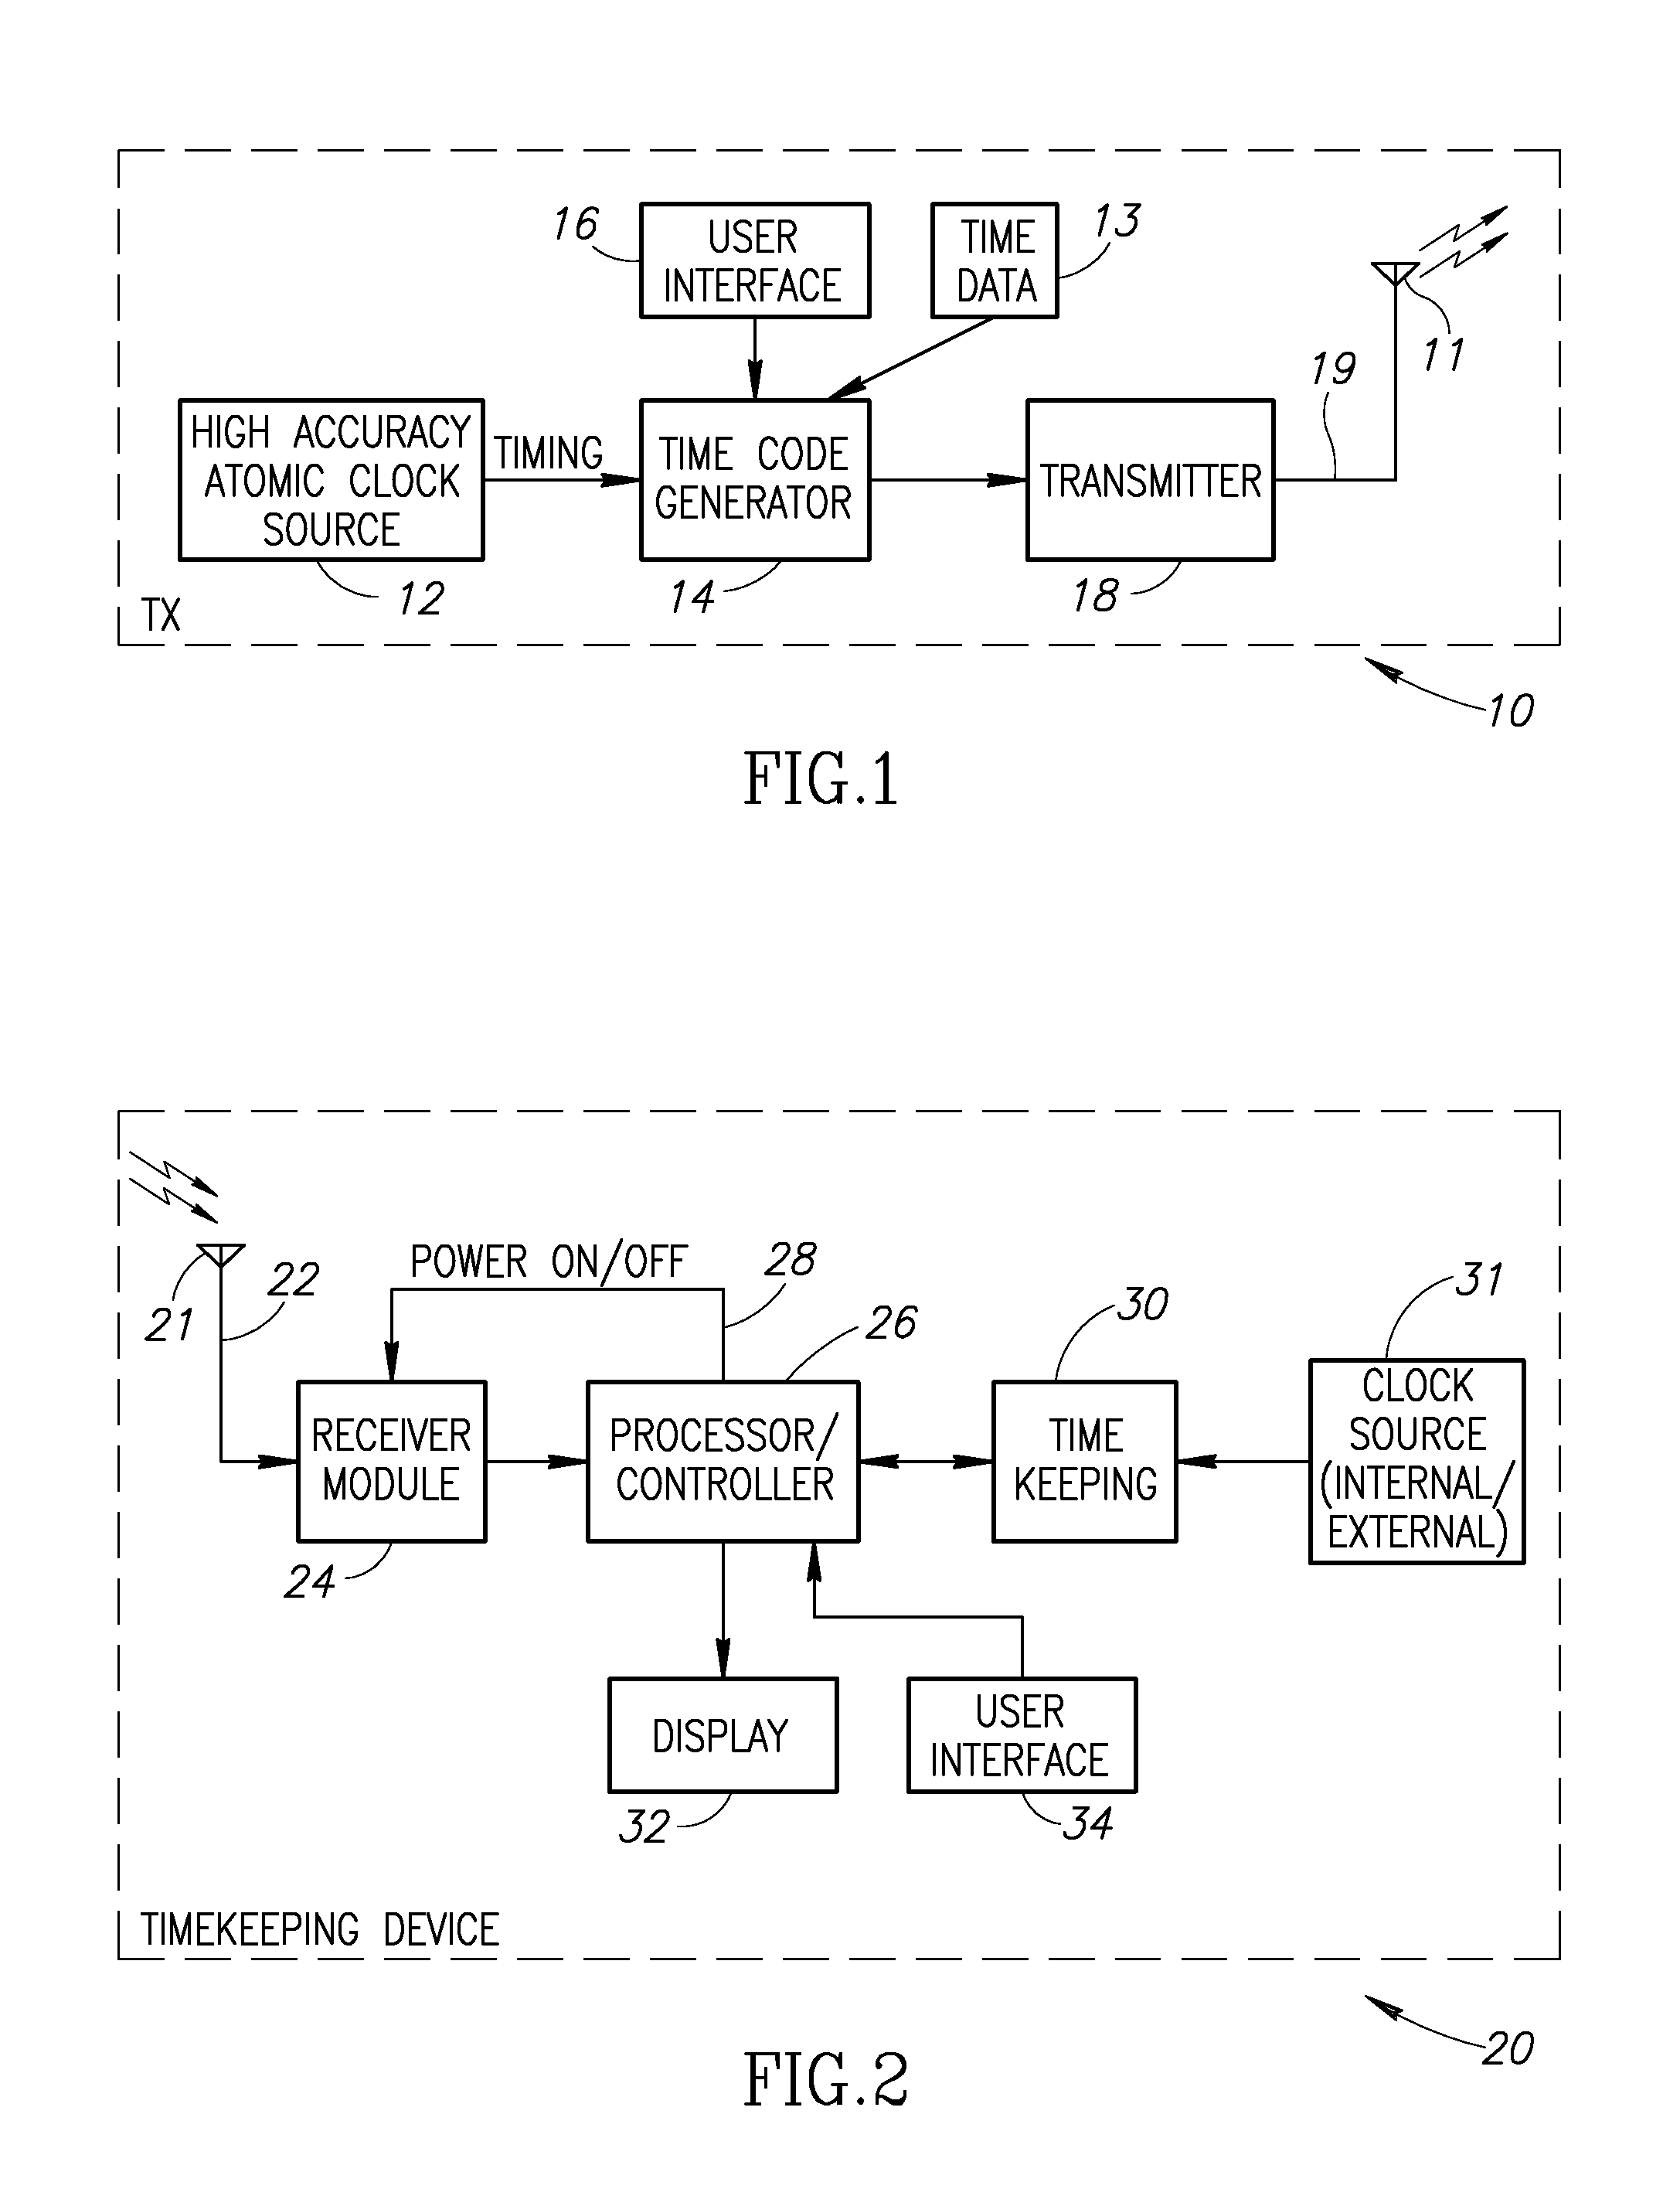 Timing and time information extraction in a radio controlled clock receiver